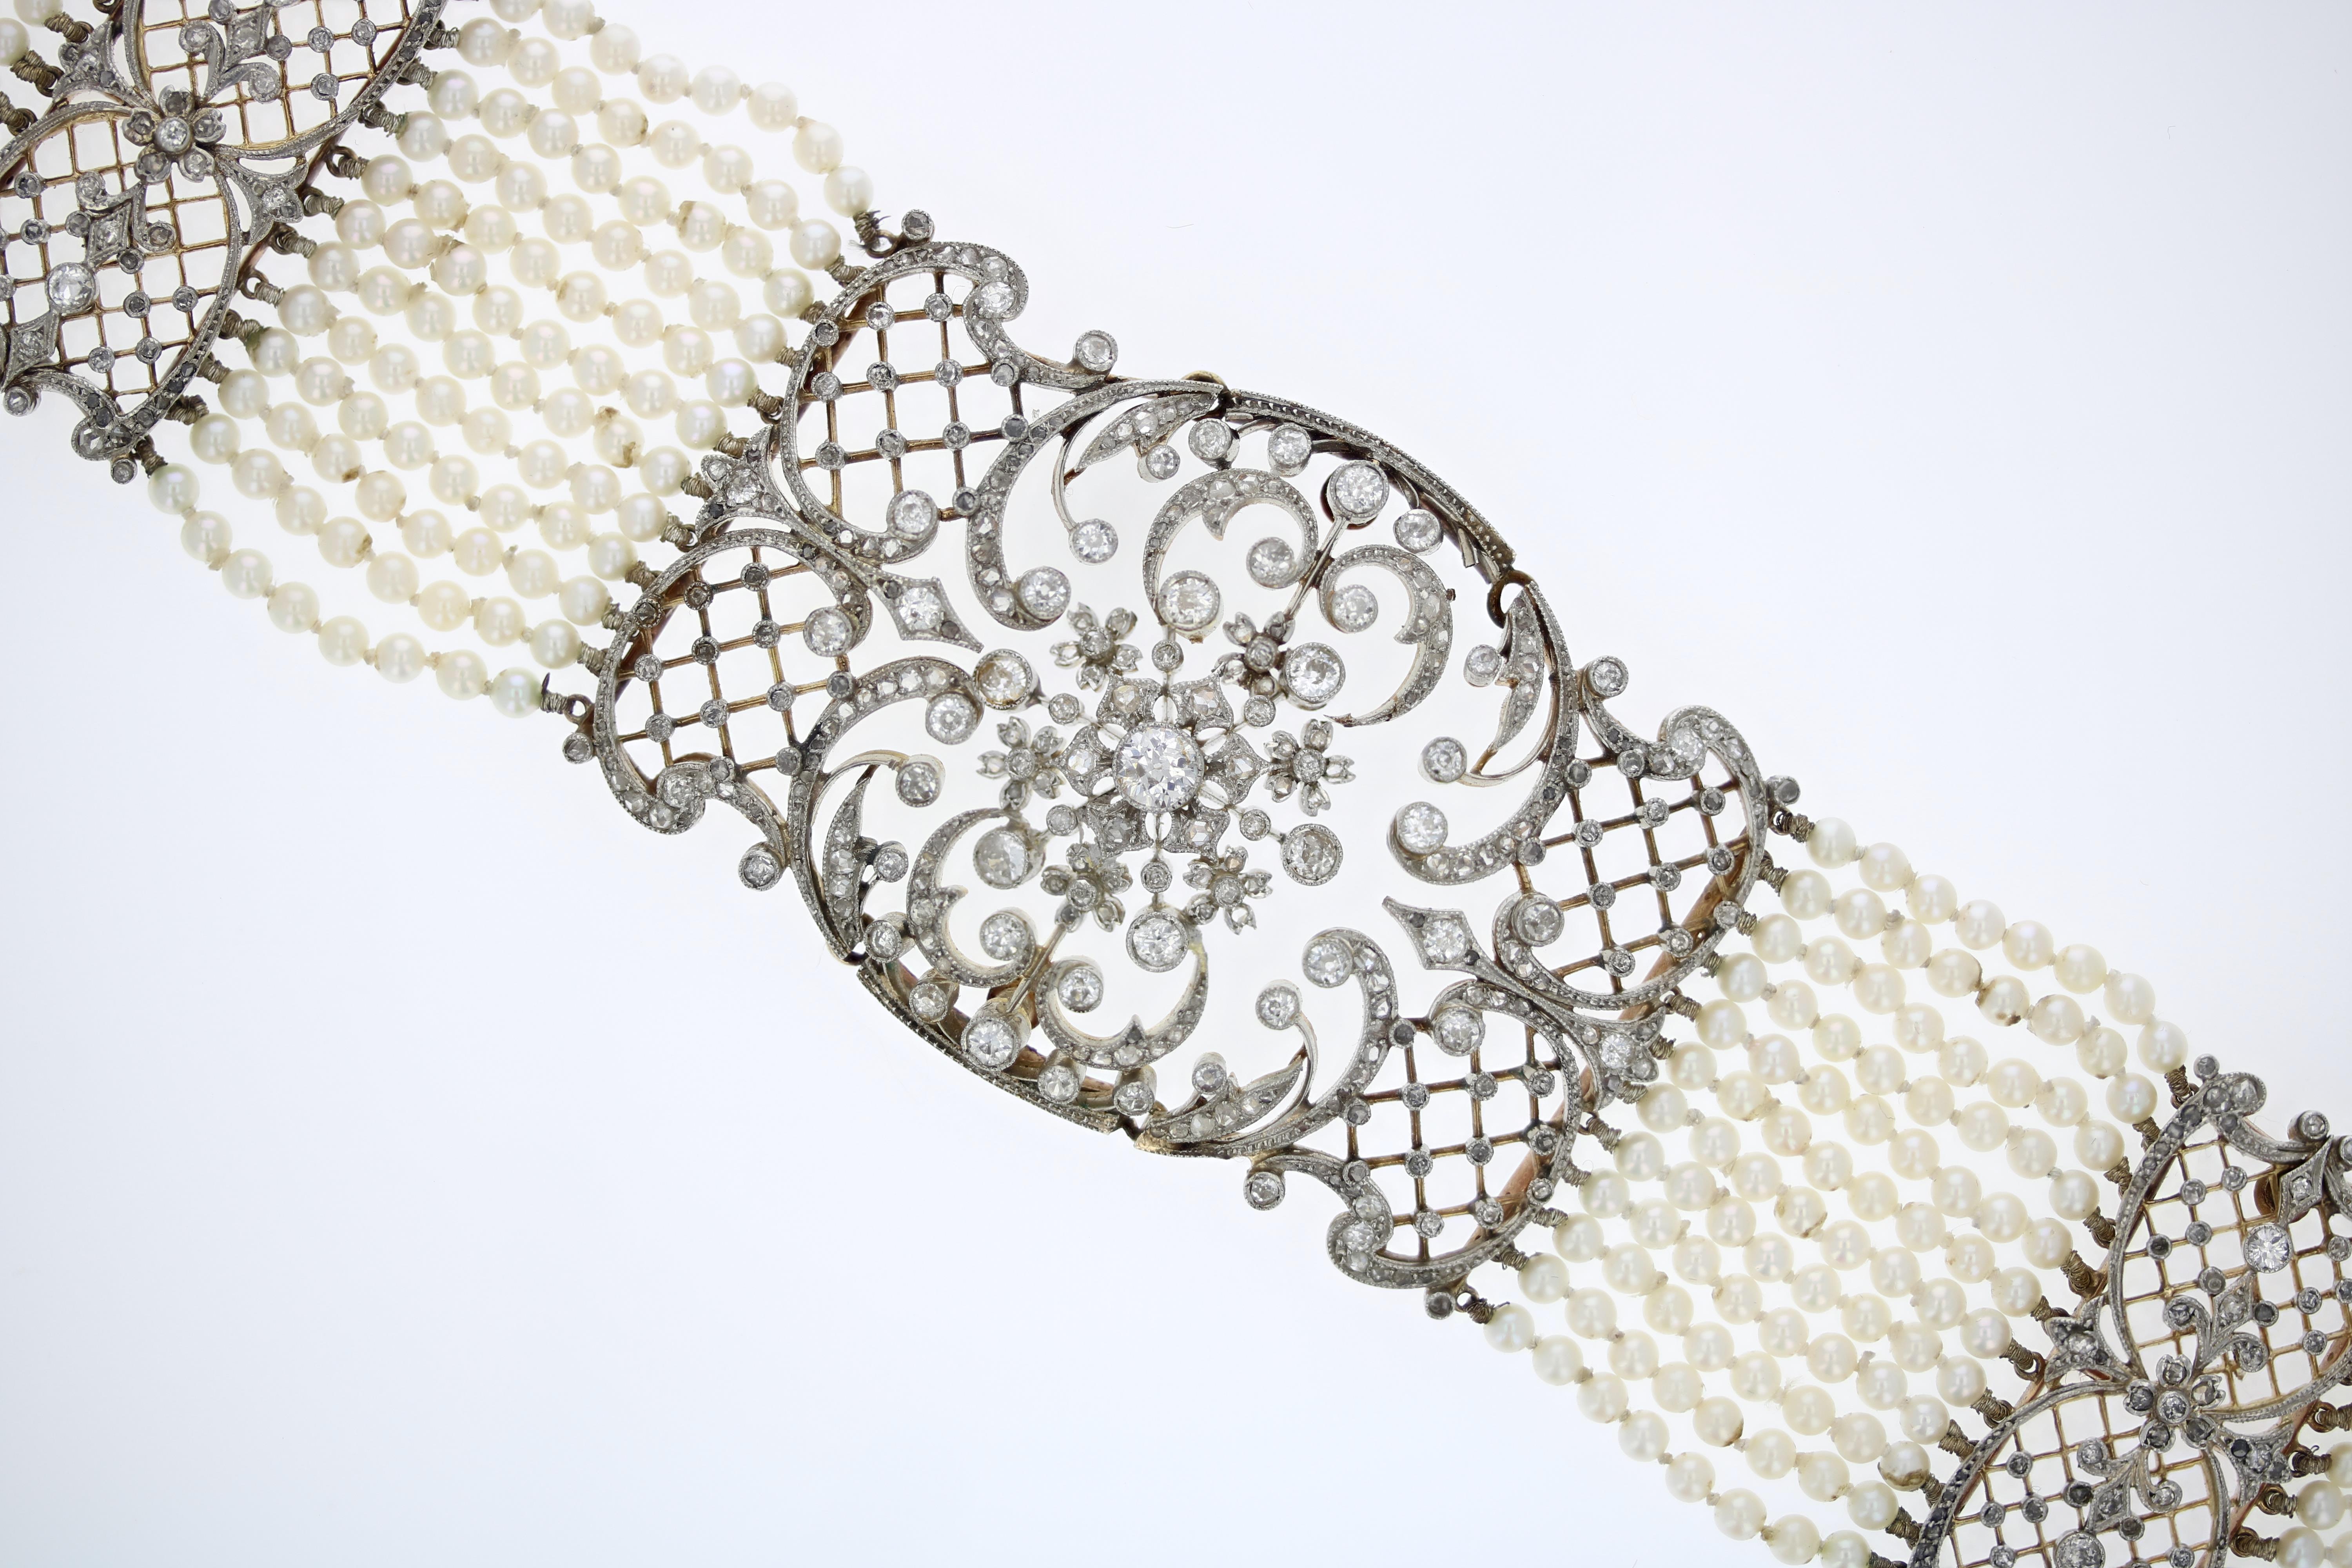 A finely crafted Edwardian era collar necklace with 12 strands of seed pearls interspersed with three stations of diamond medallions. The diamonds are European-cut and set in intricate floral filigree metalwork of platinum and yellow gold.